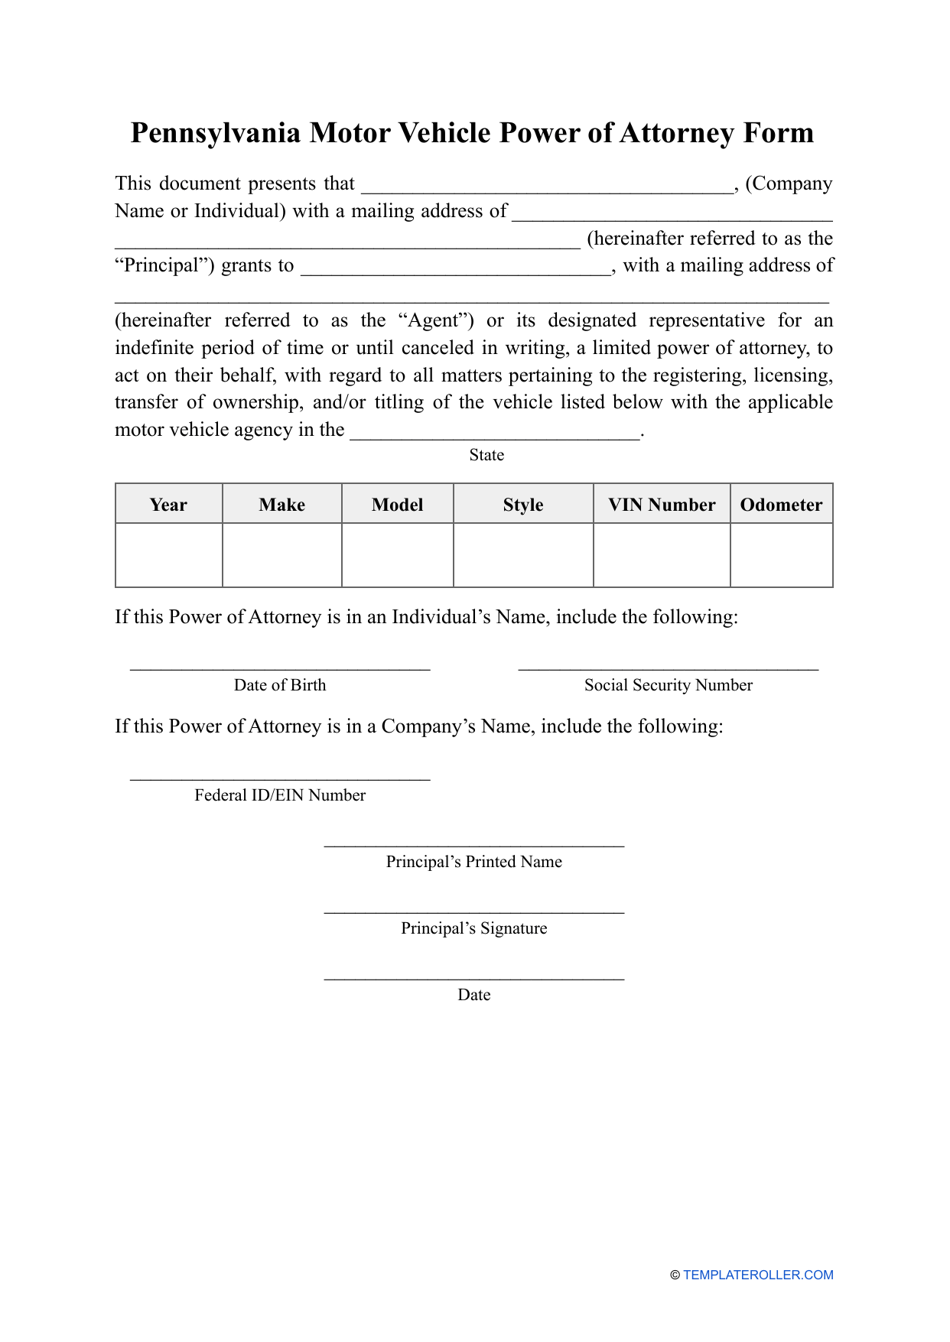 Motor Vehicle Power of Attorney Form - Pennsylvania, Page 1